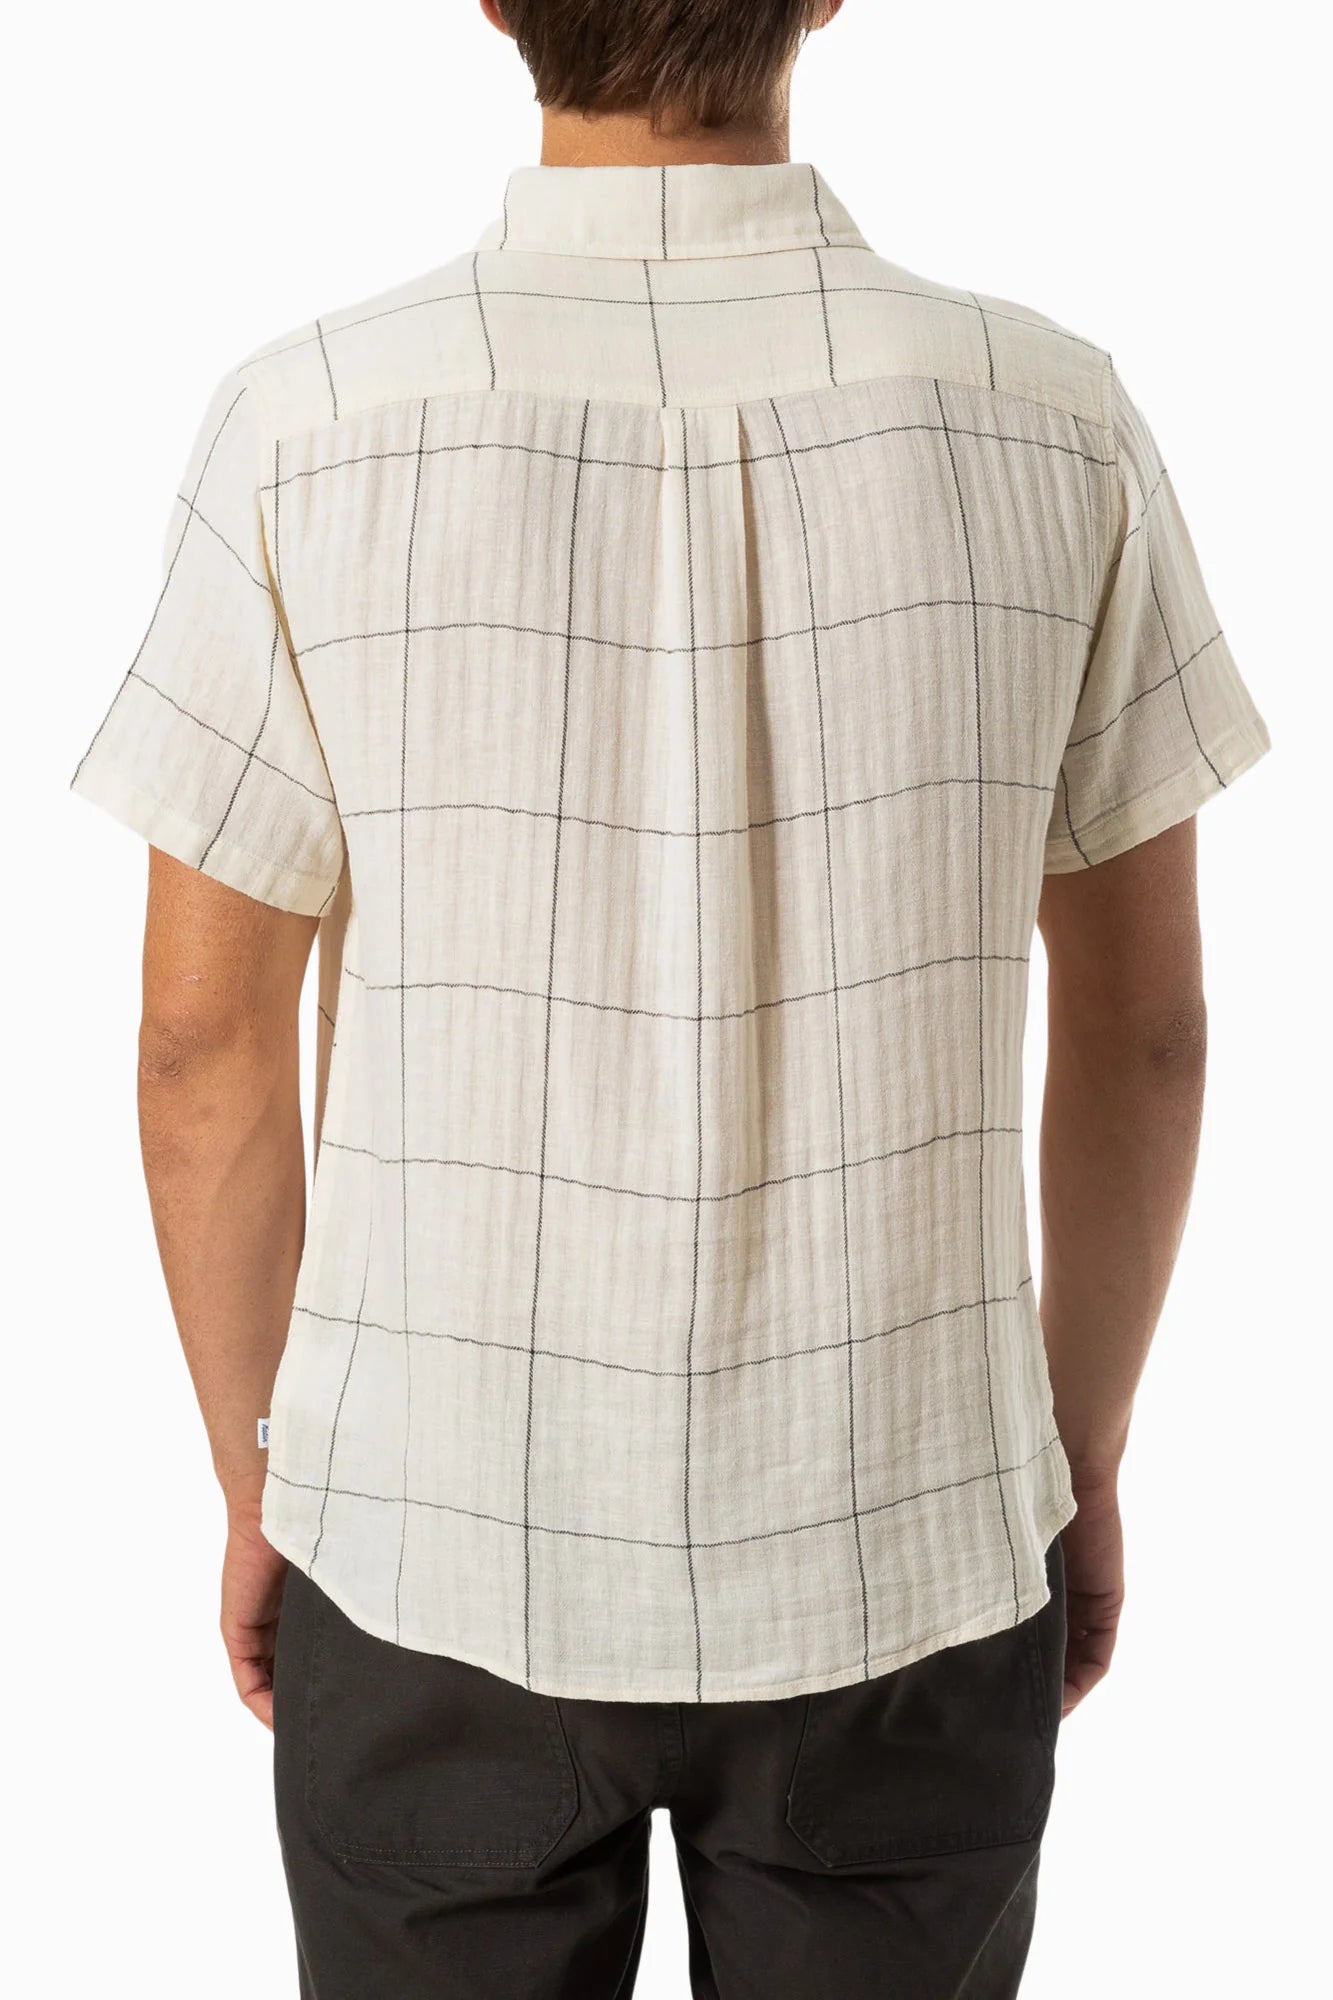 Back view of a man wearing a white short sleeve button up shirt with a thin black plaid design